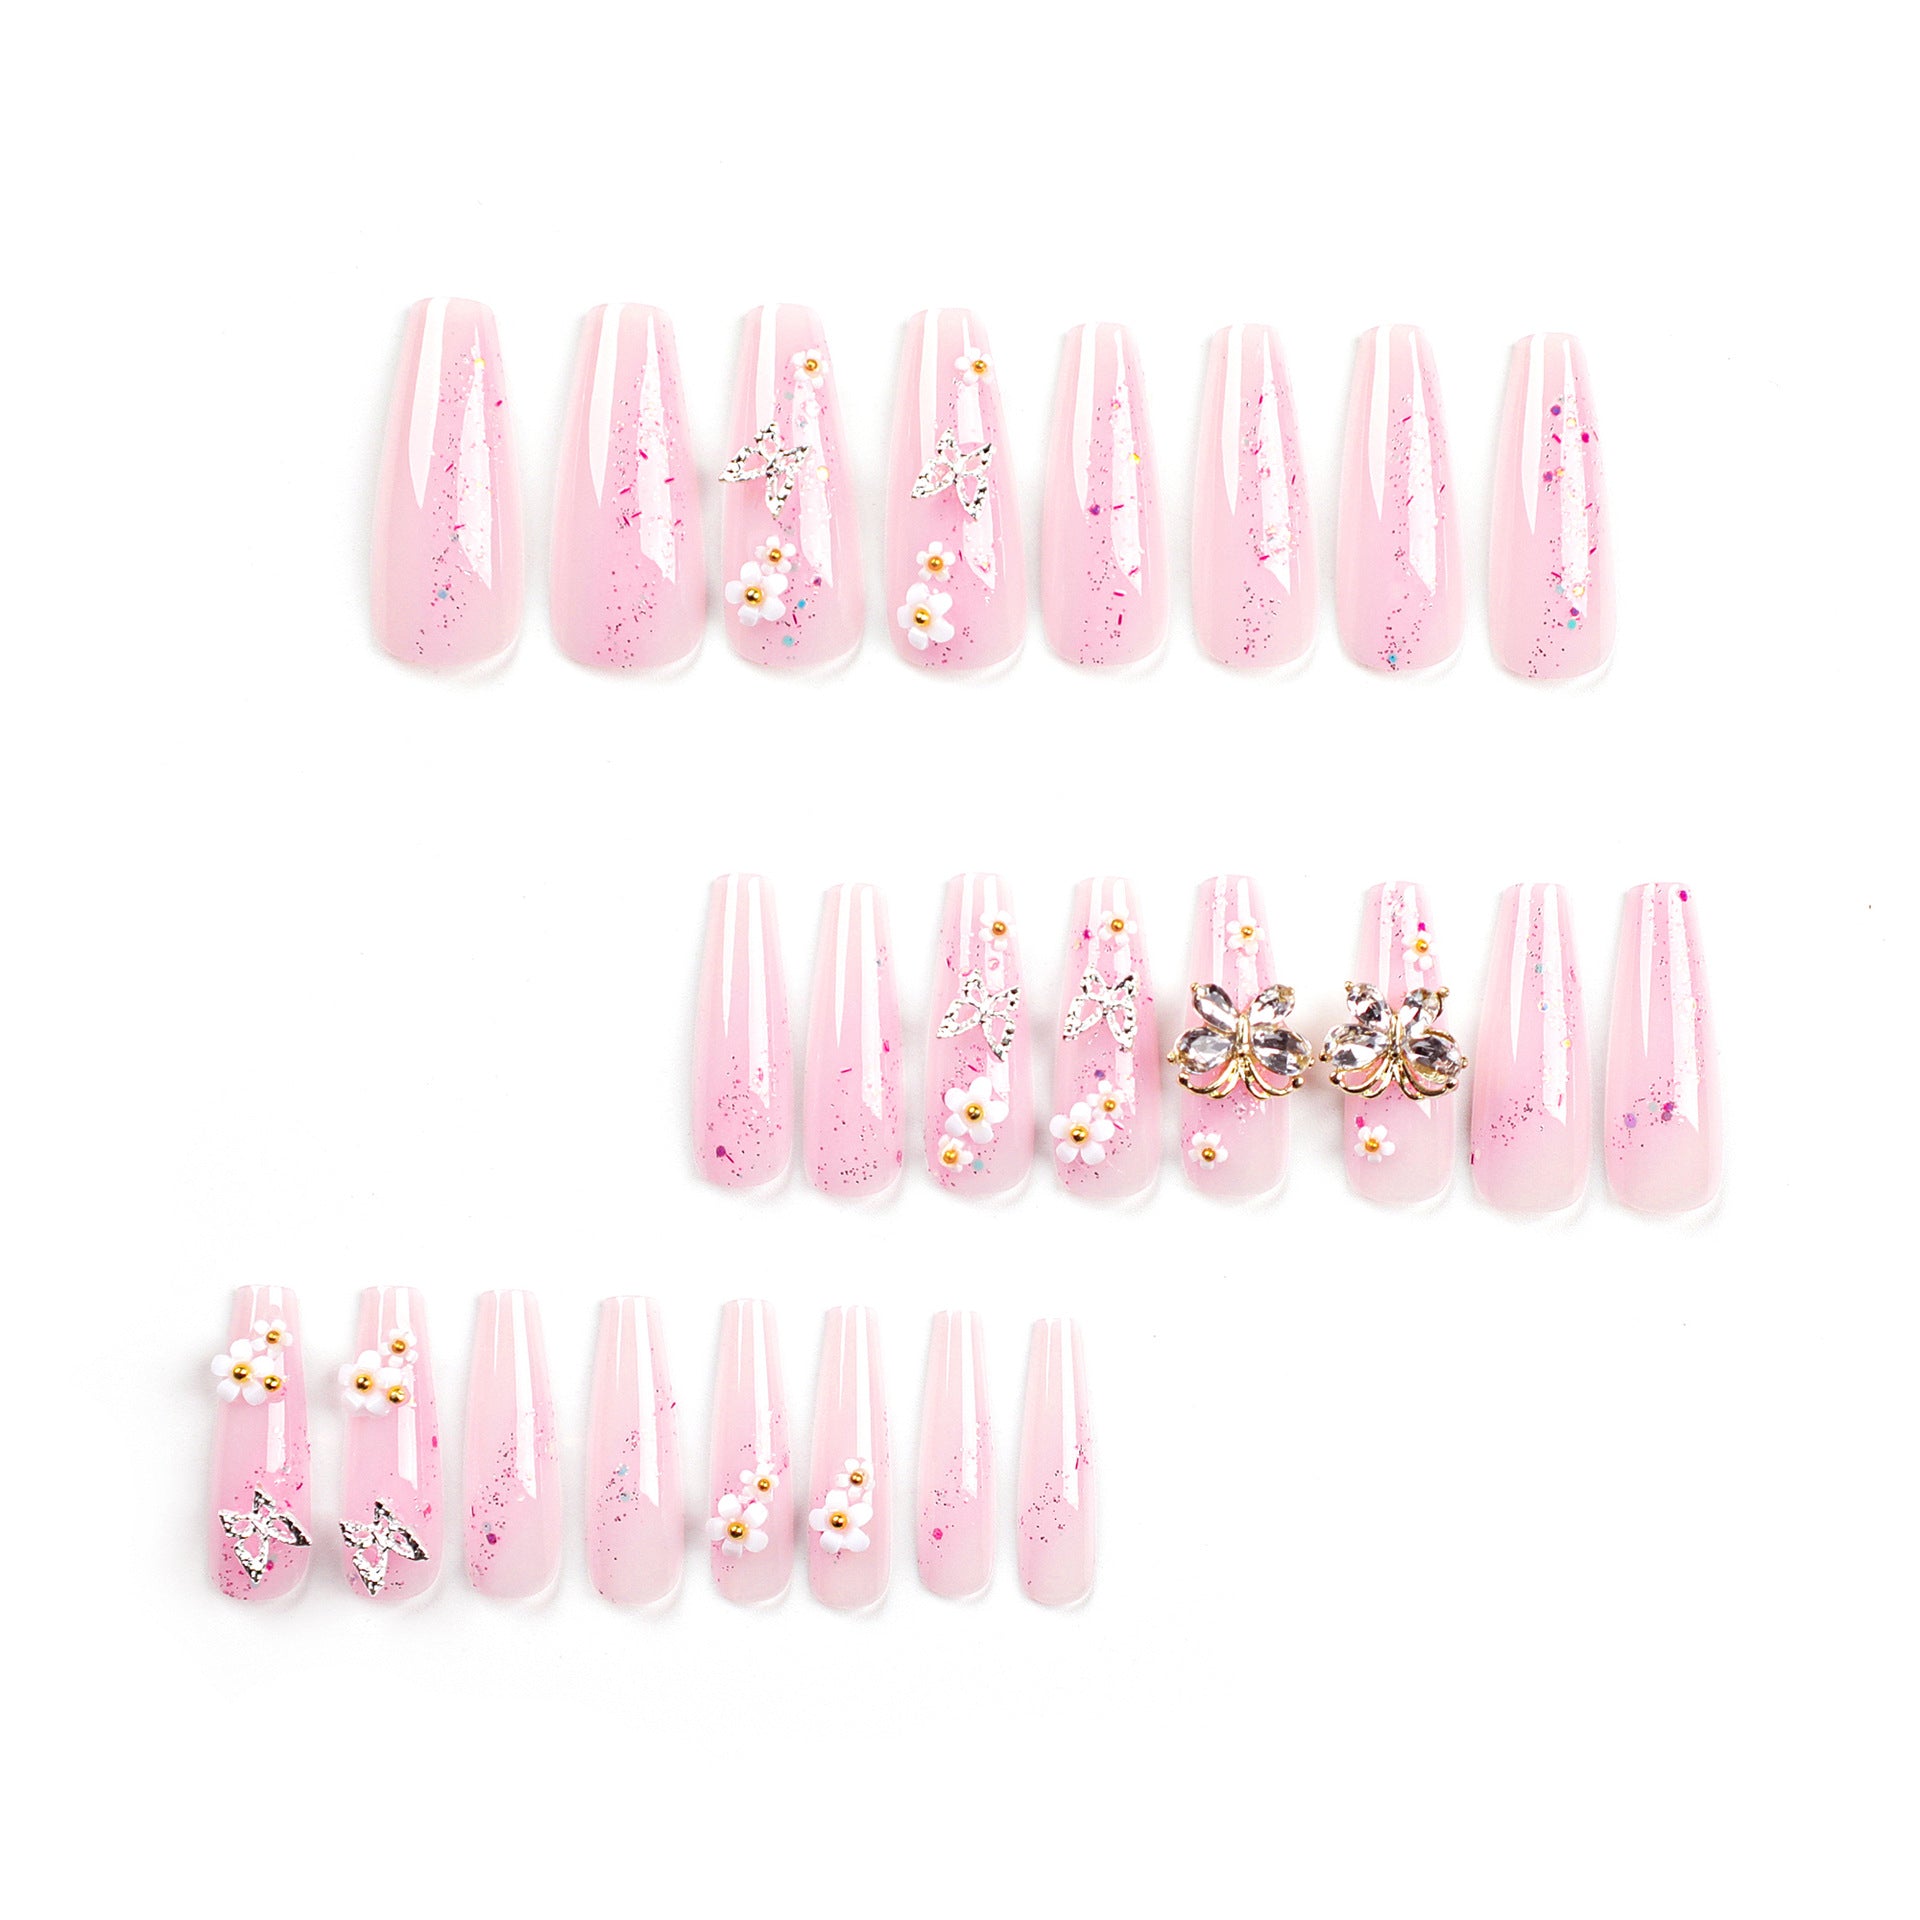 24 PCS LONG COFFINF LOWERS BUTTERFLY PRESS ON NAILS